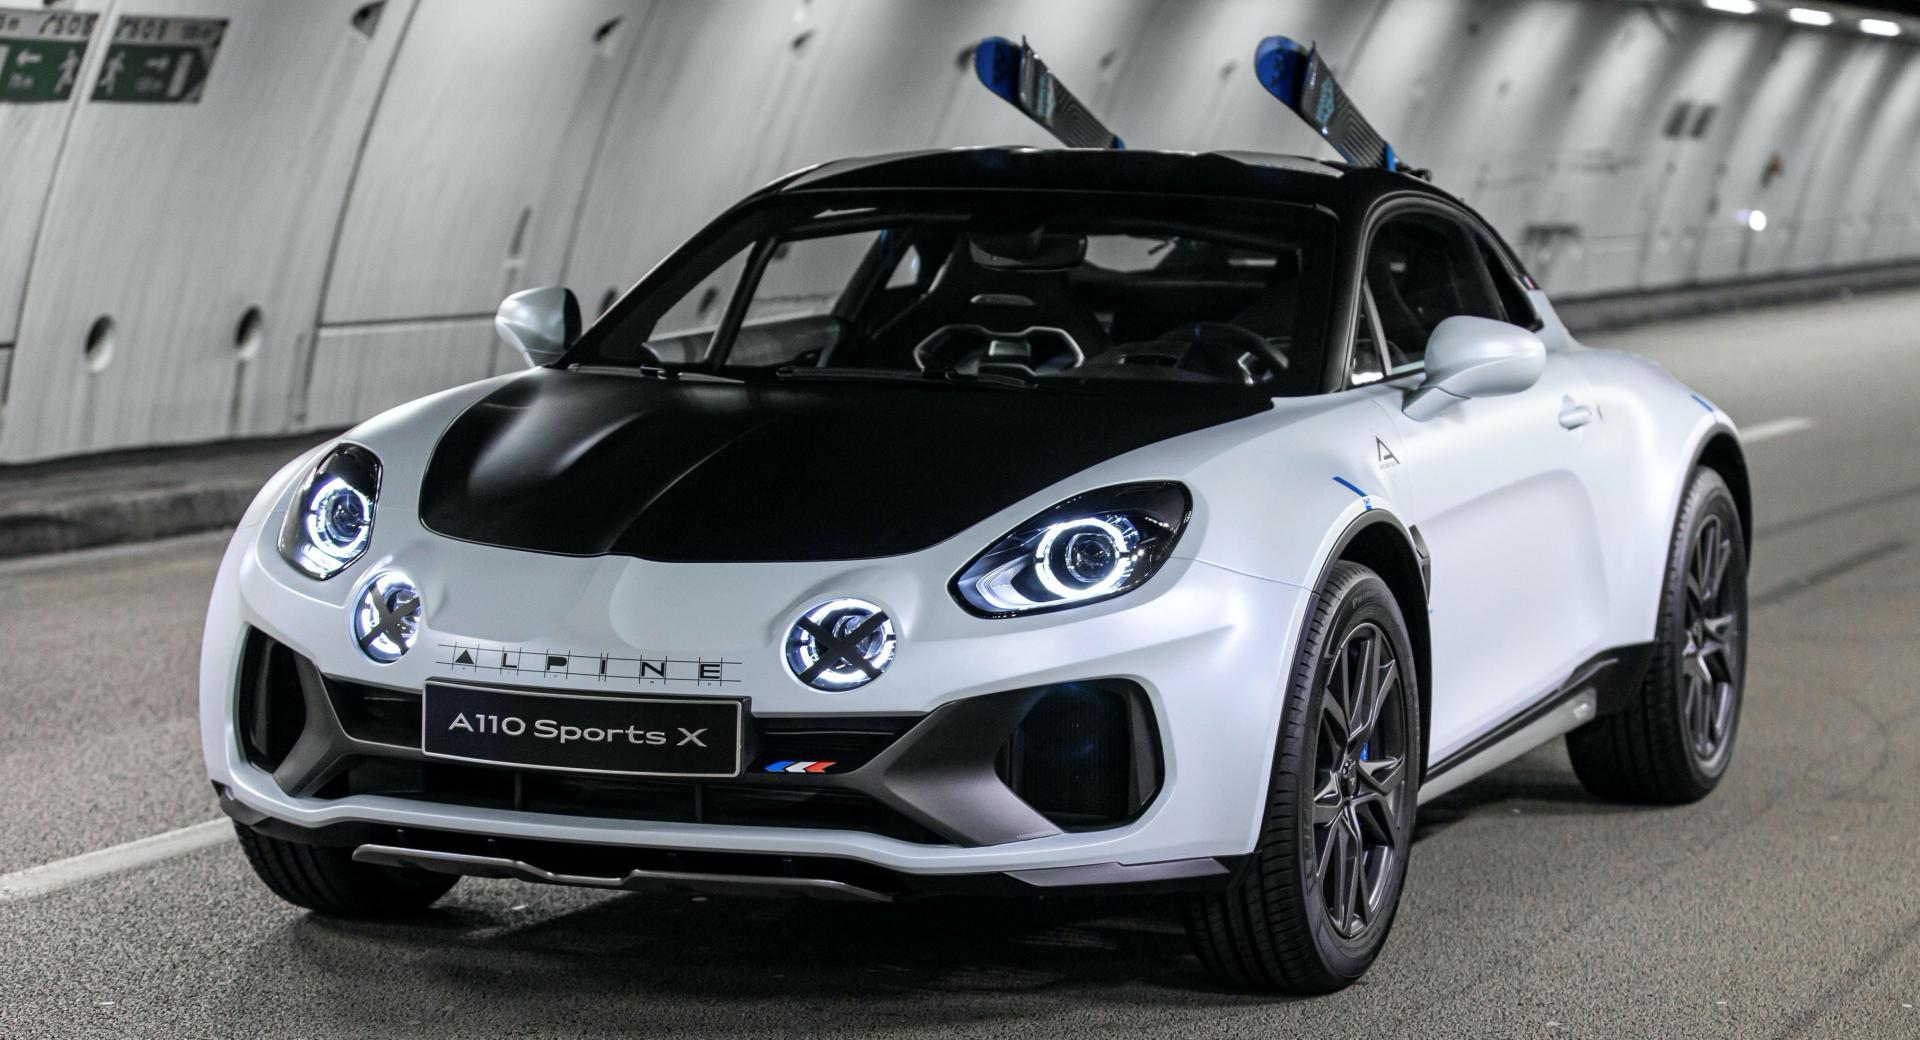 Alpine A110 SportsX Show Car Is Wider, Rides Higher And ...